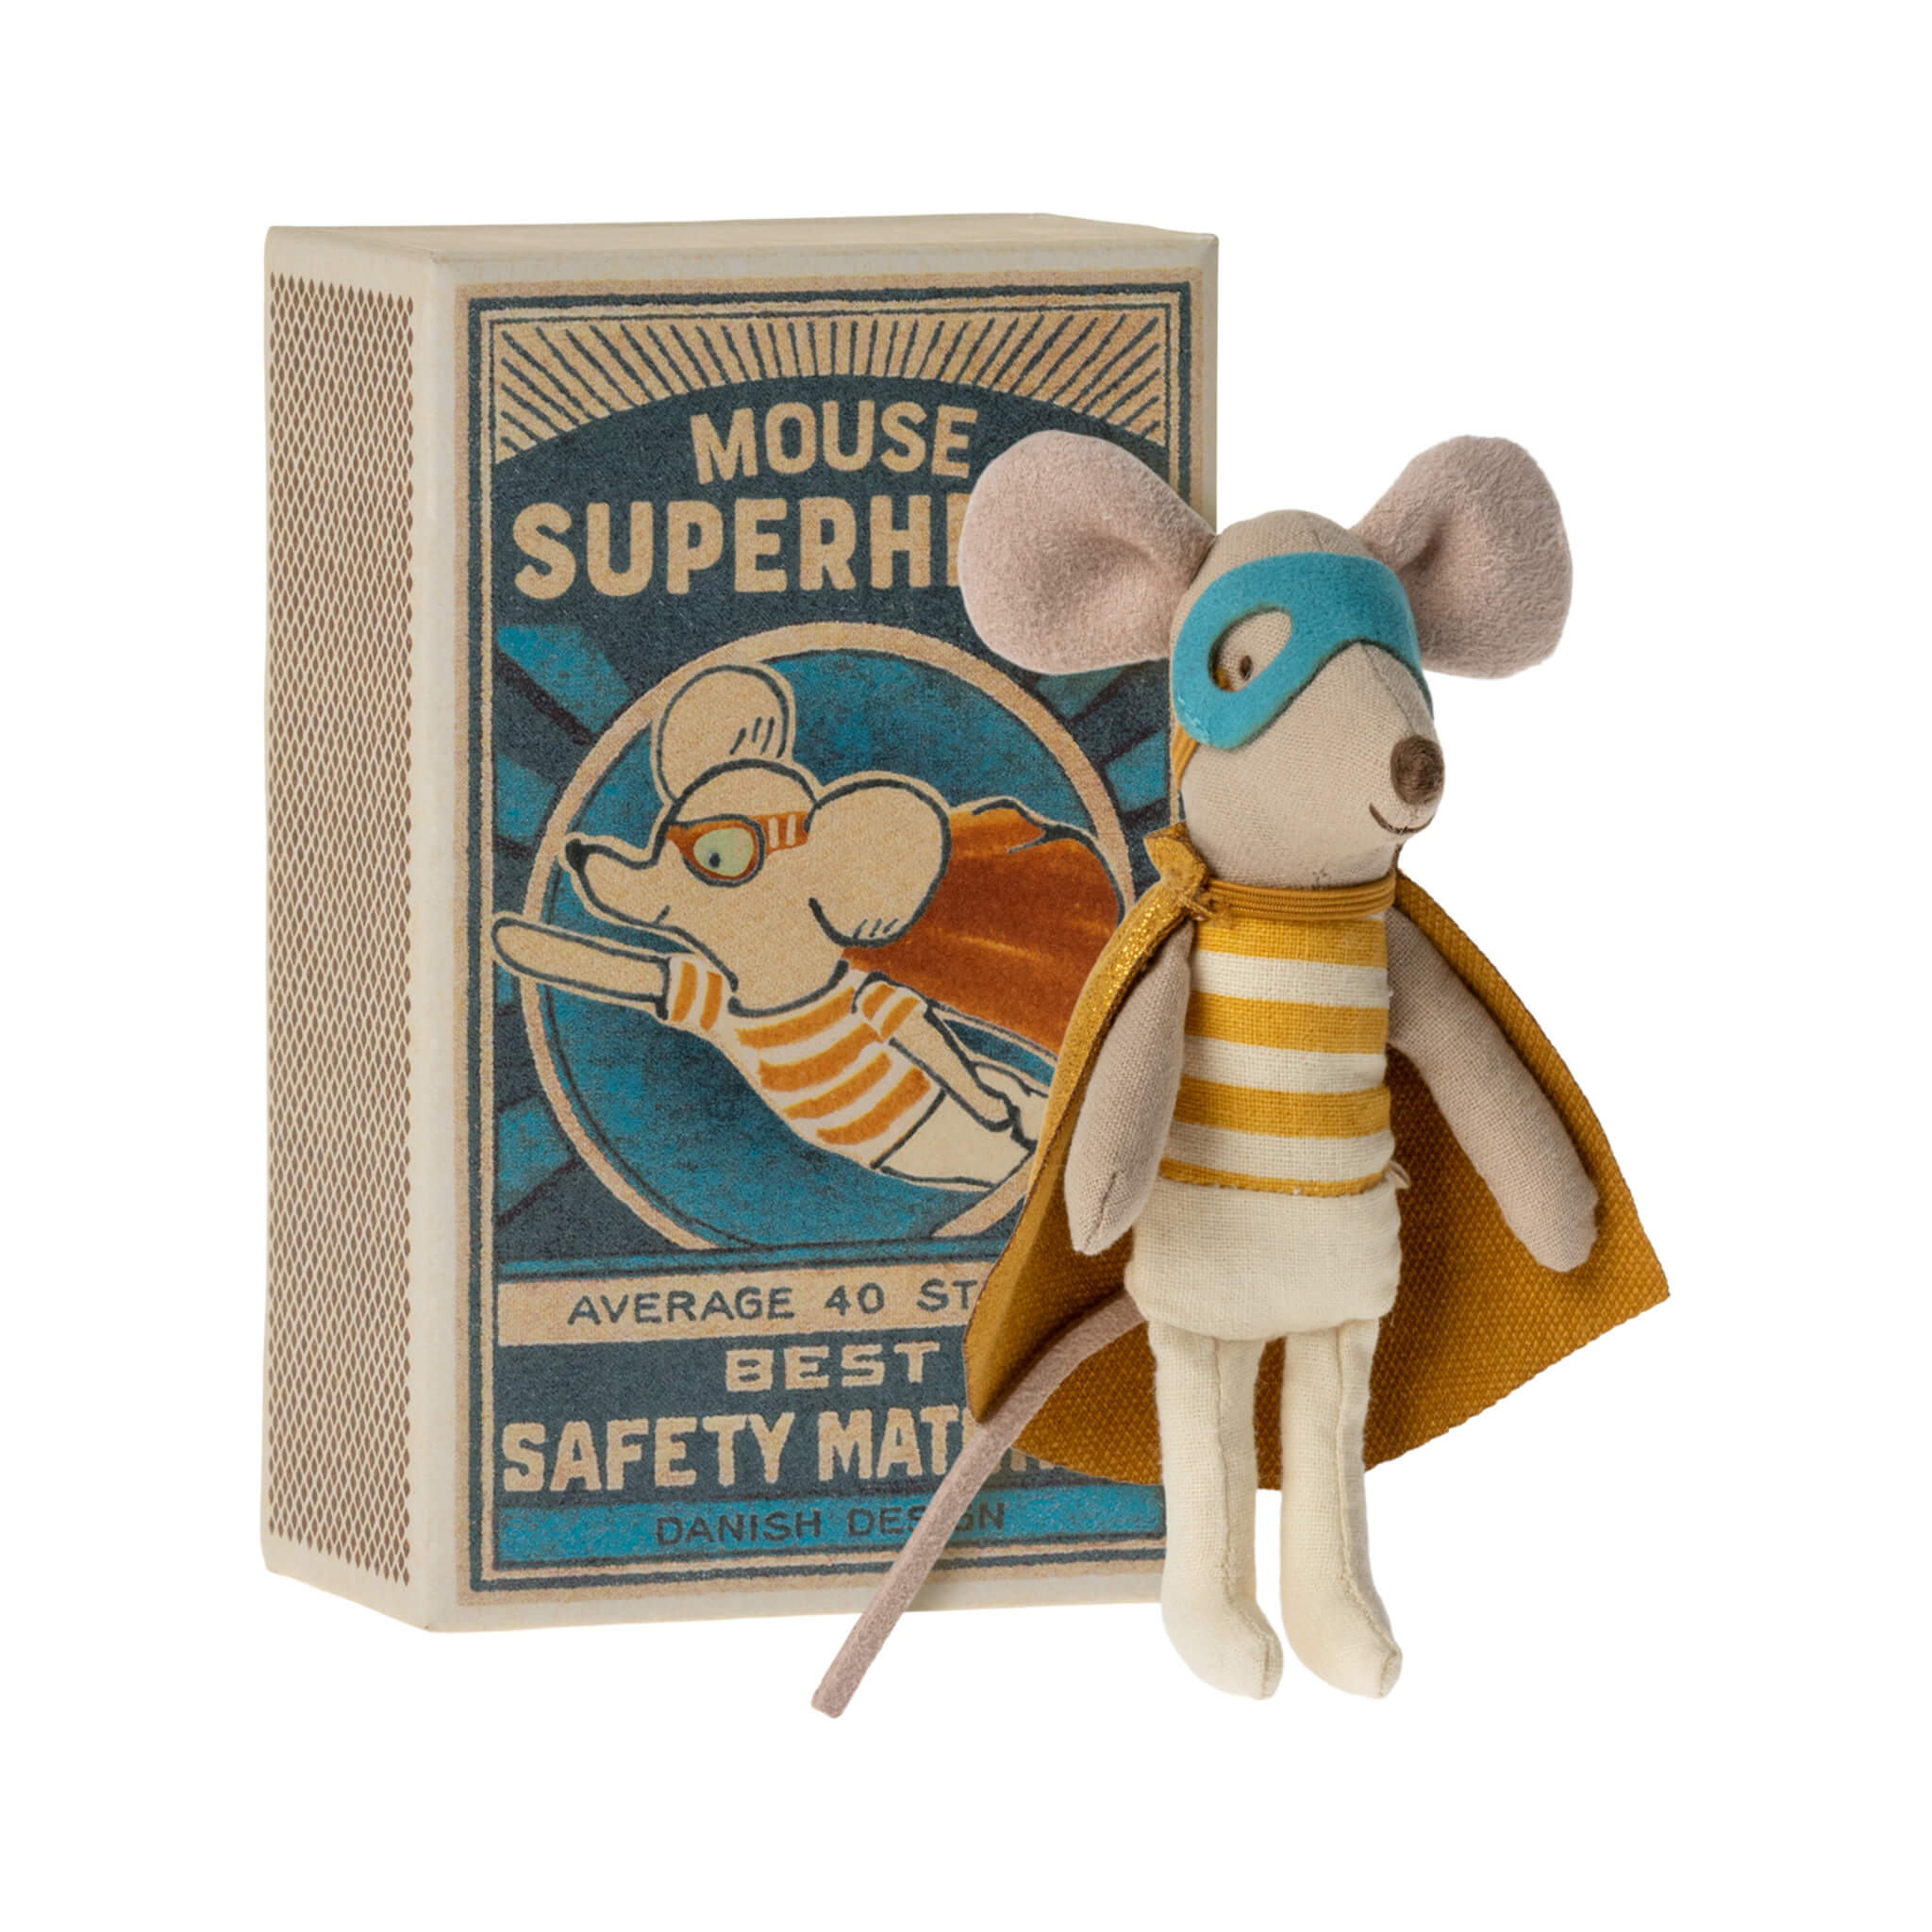 Maileg Superhero Mouse - Little Brother in Matchbox